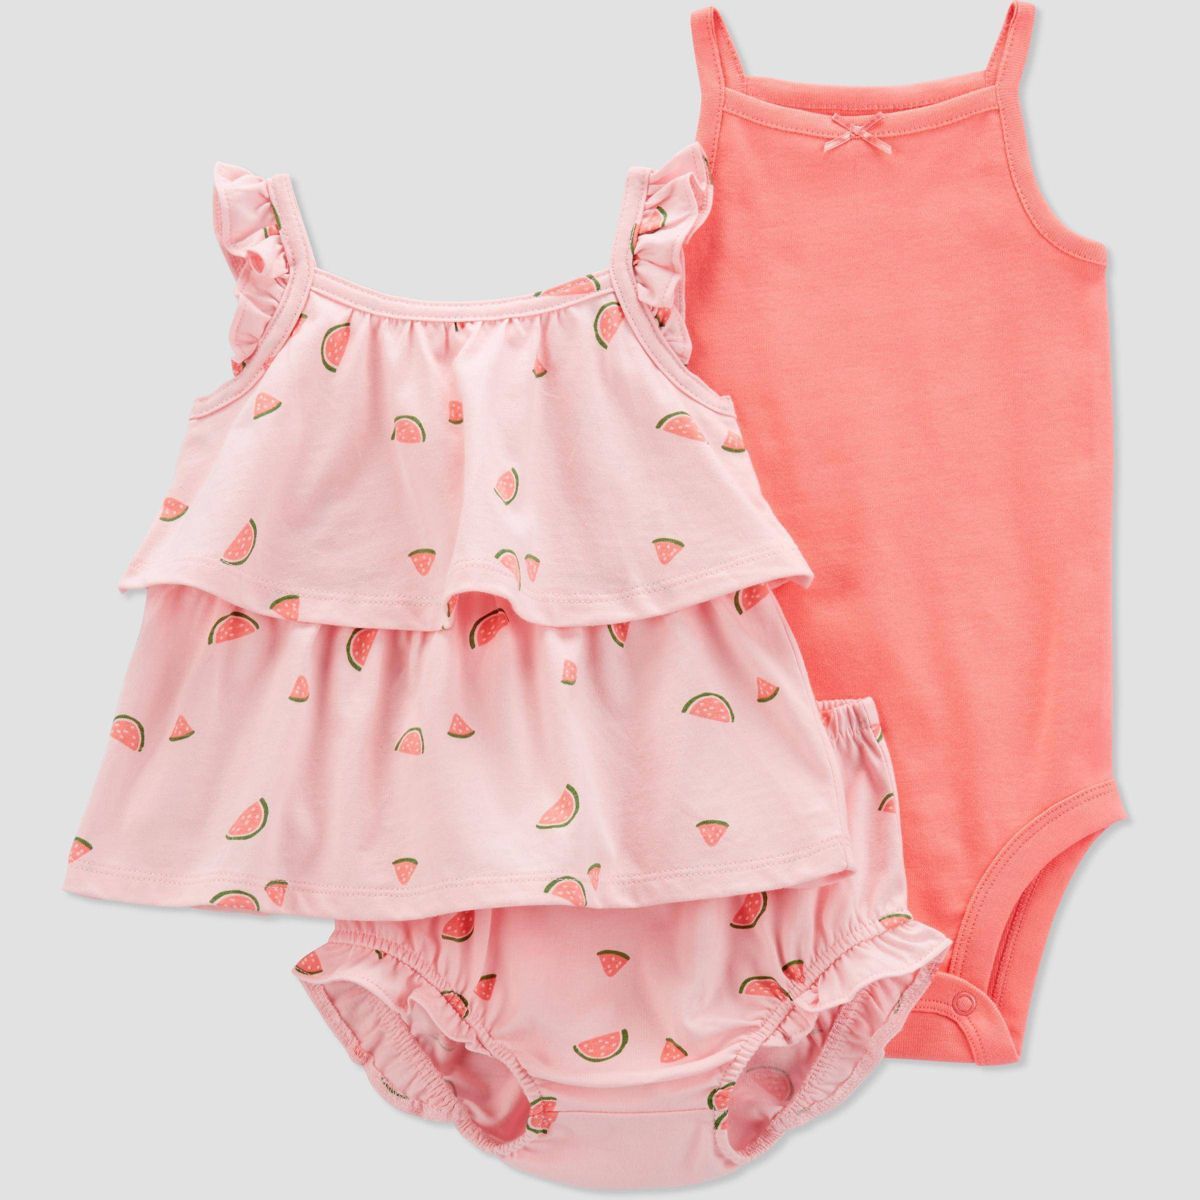 Carter's Just One You® Baby Girls' Watermelon Top & Bottom Set - Pink | Target